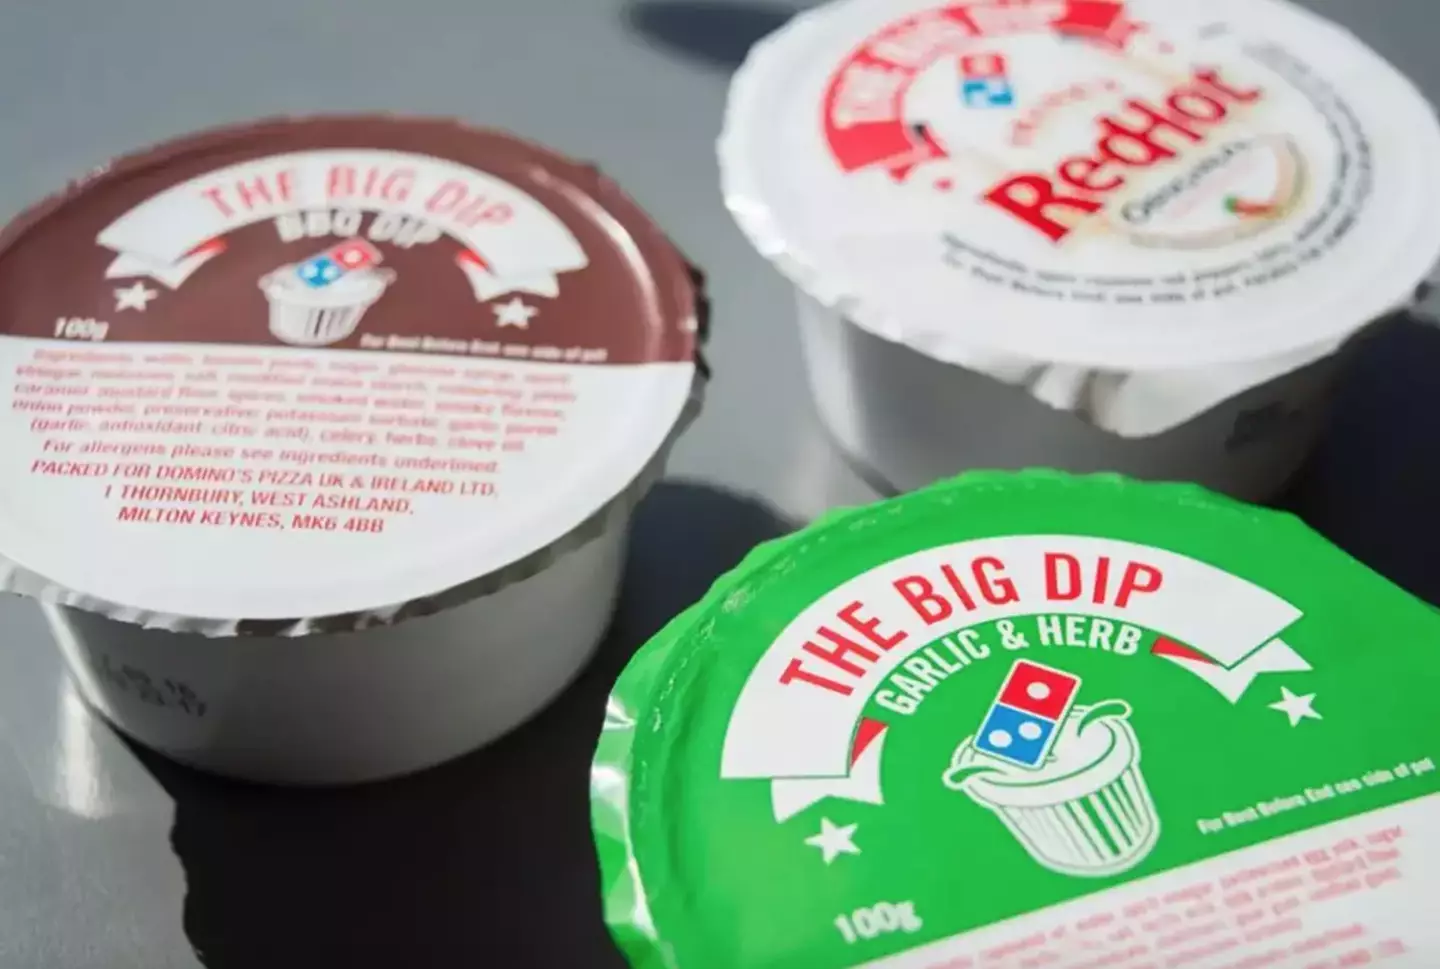 A large pot of Domino's Garlic and herb dip clocks in at a whopping 675 calories.